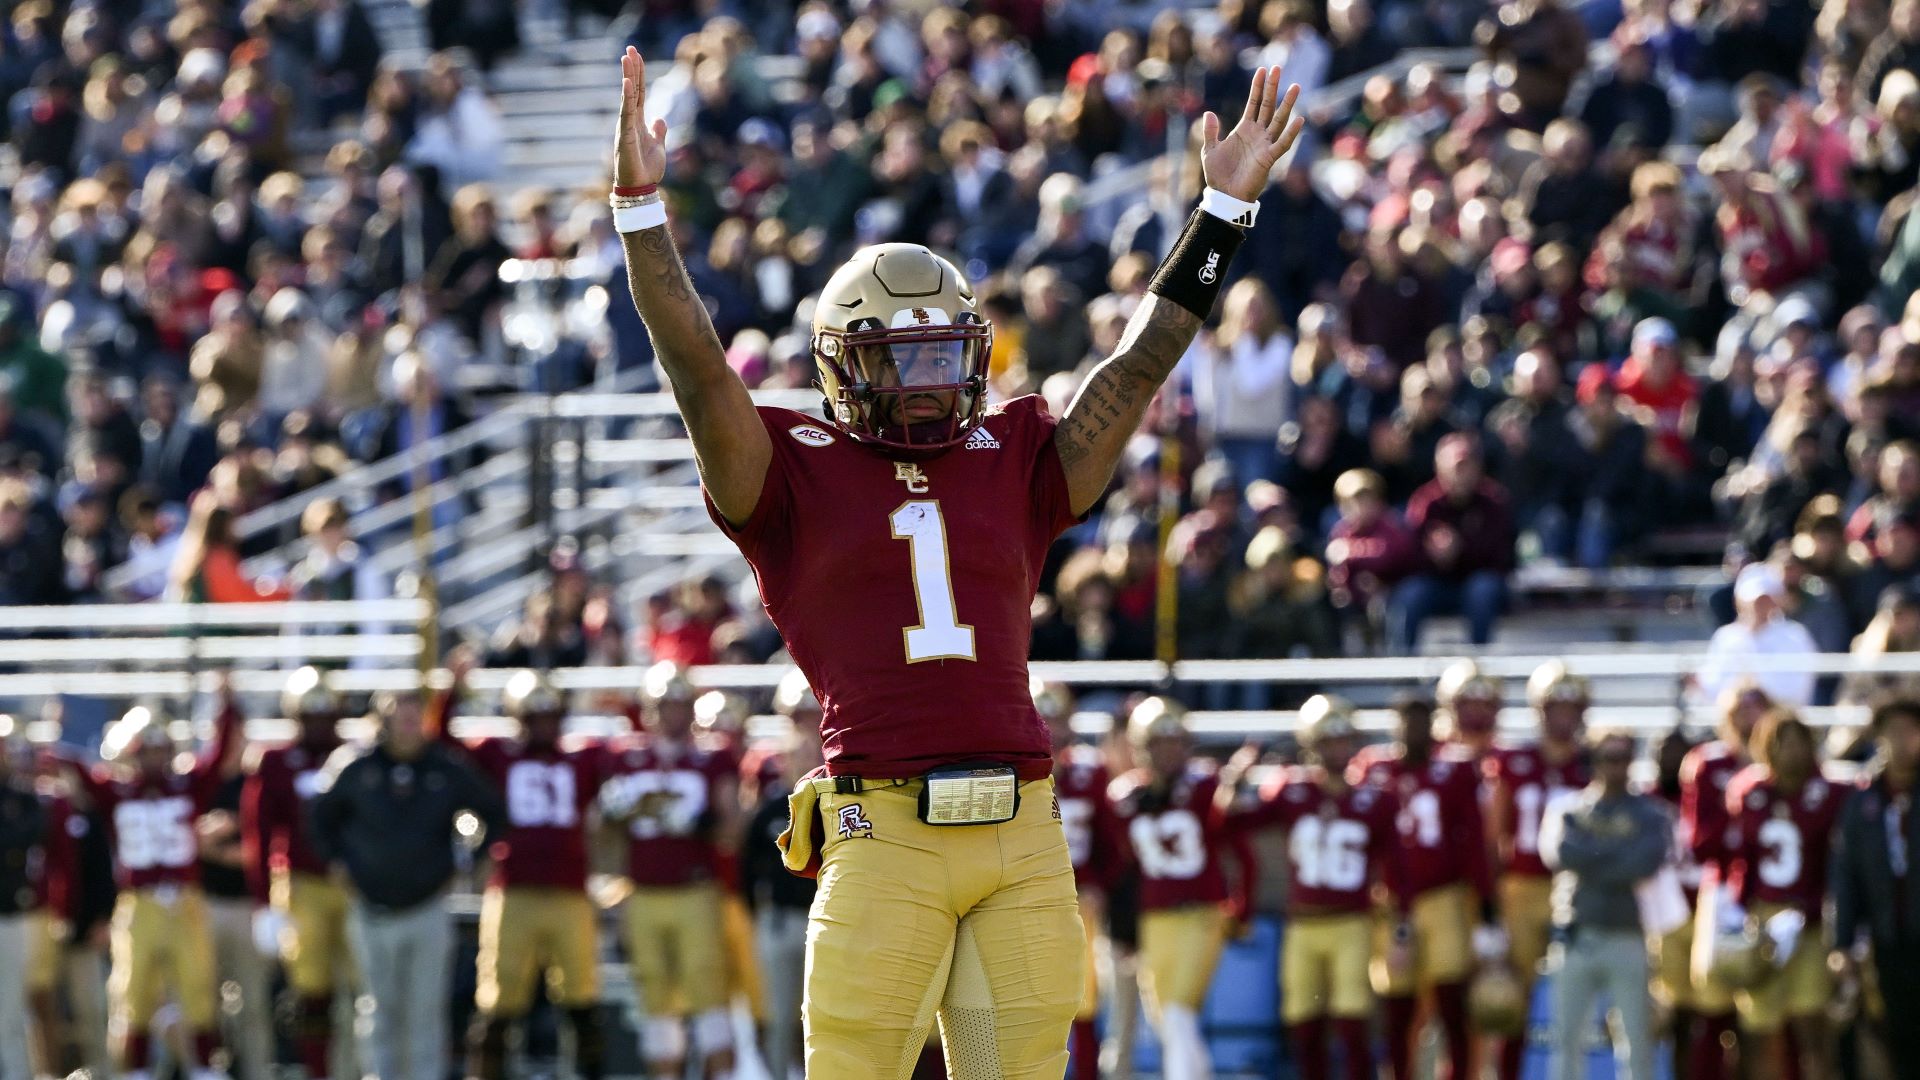 Can Boston College End Bowl Win Drought With Fenway Park Advantage?